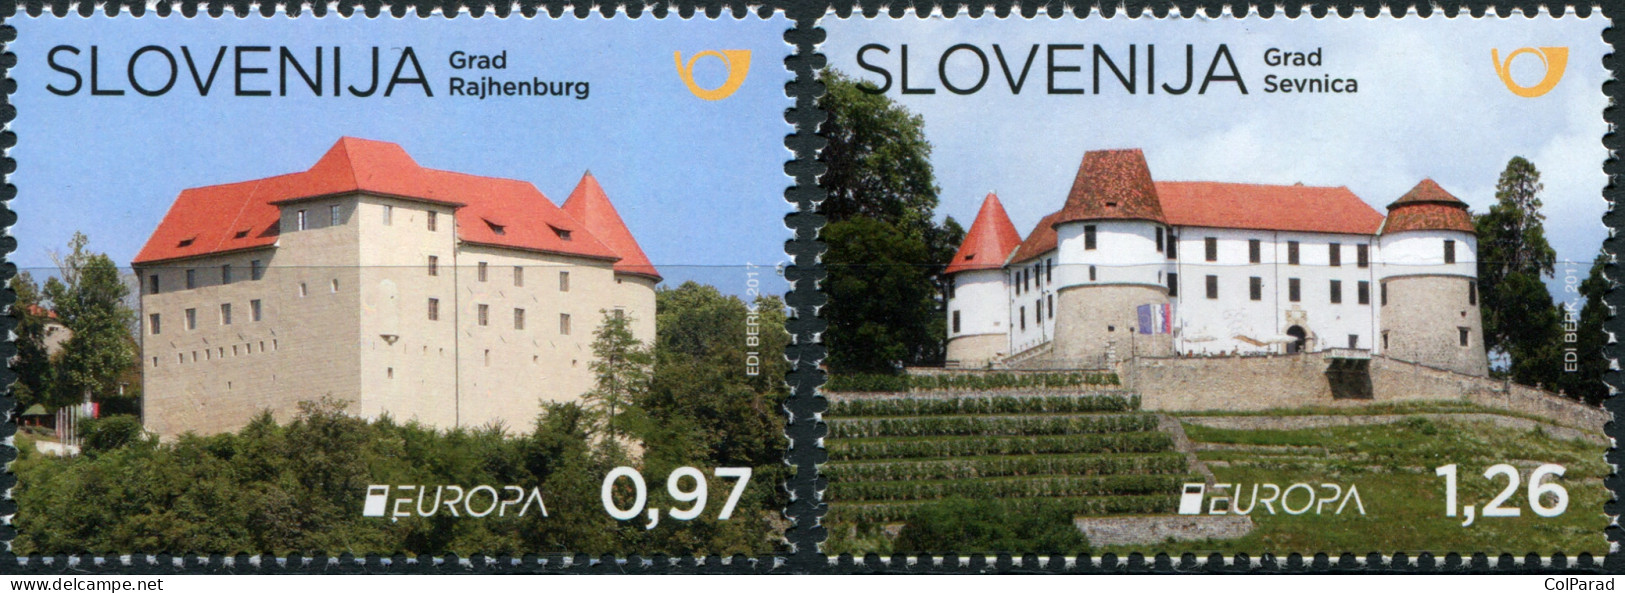 SLOVENIA - 2017 - SET OF 2 STAMPS MNH ** - EUROPA Stamps - Palaces And Castles - Slowenien